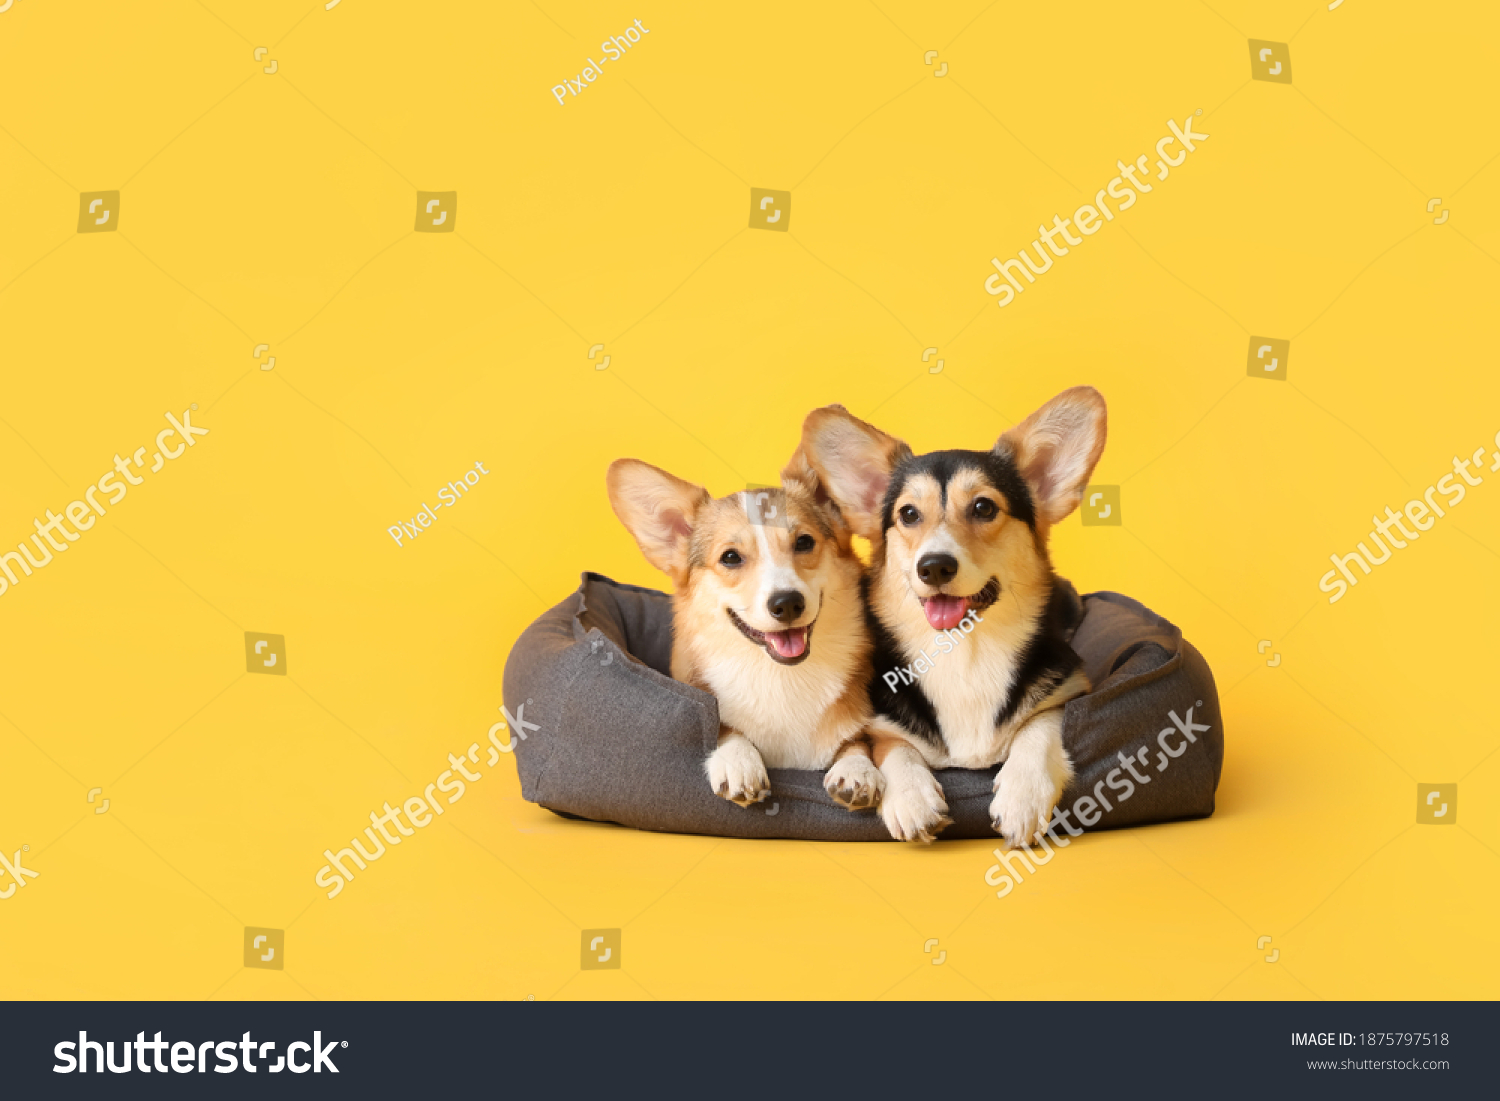 Cute corgi dogs with pet bed on color background #1875797518